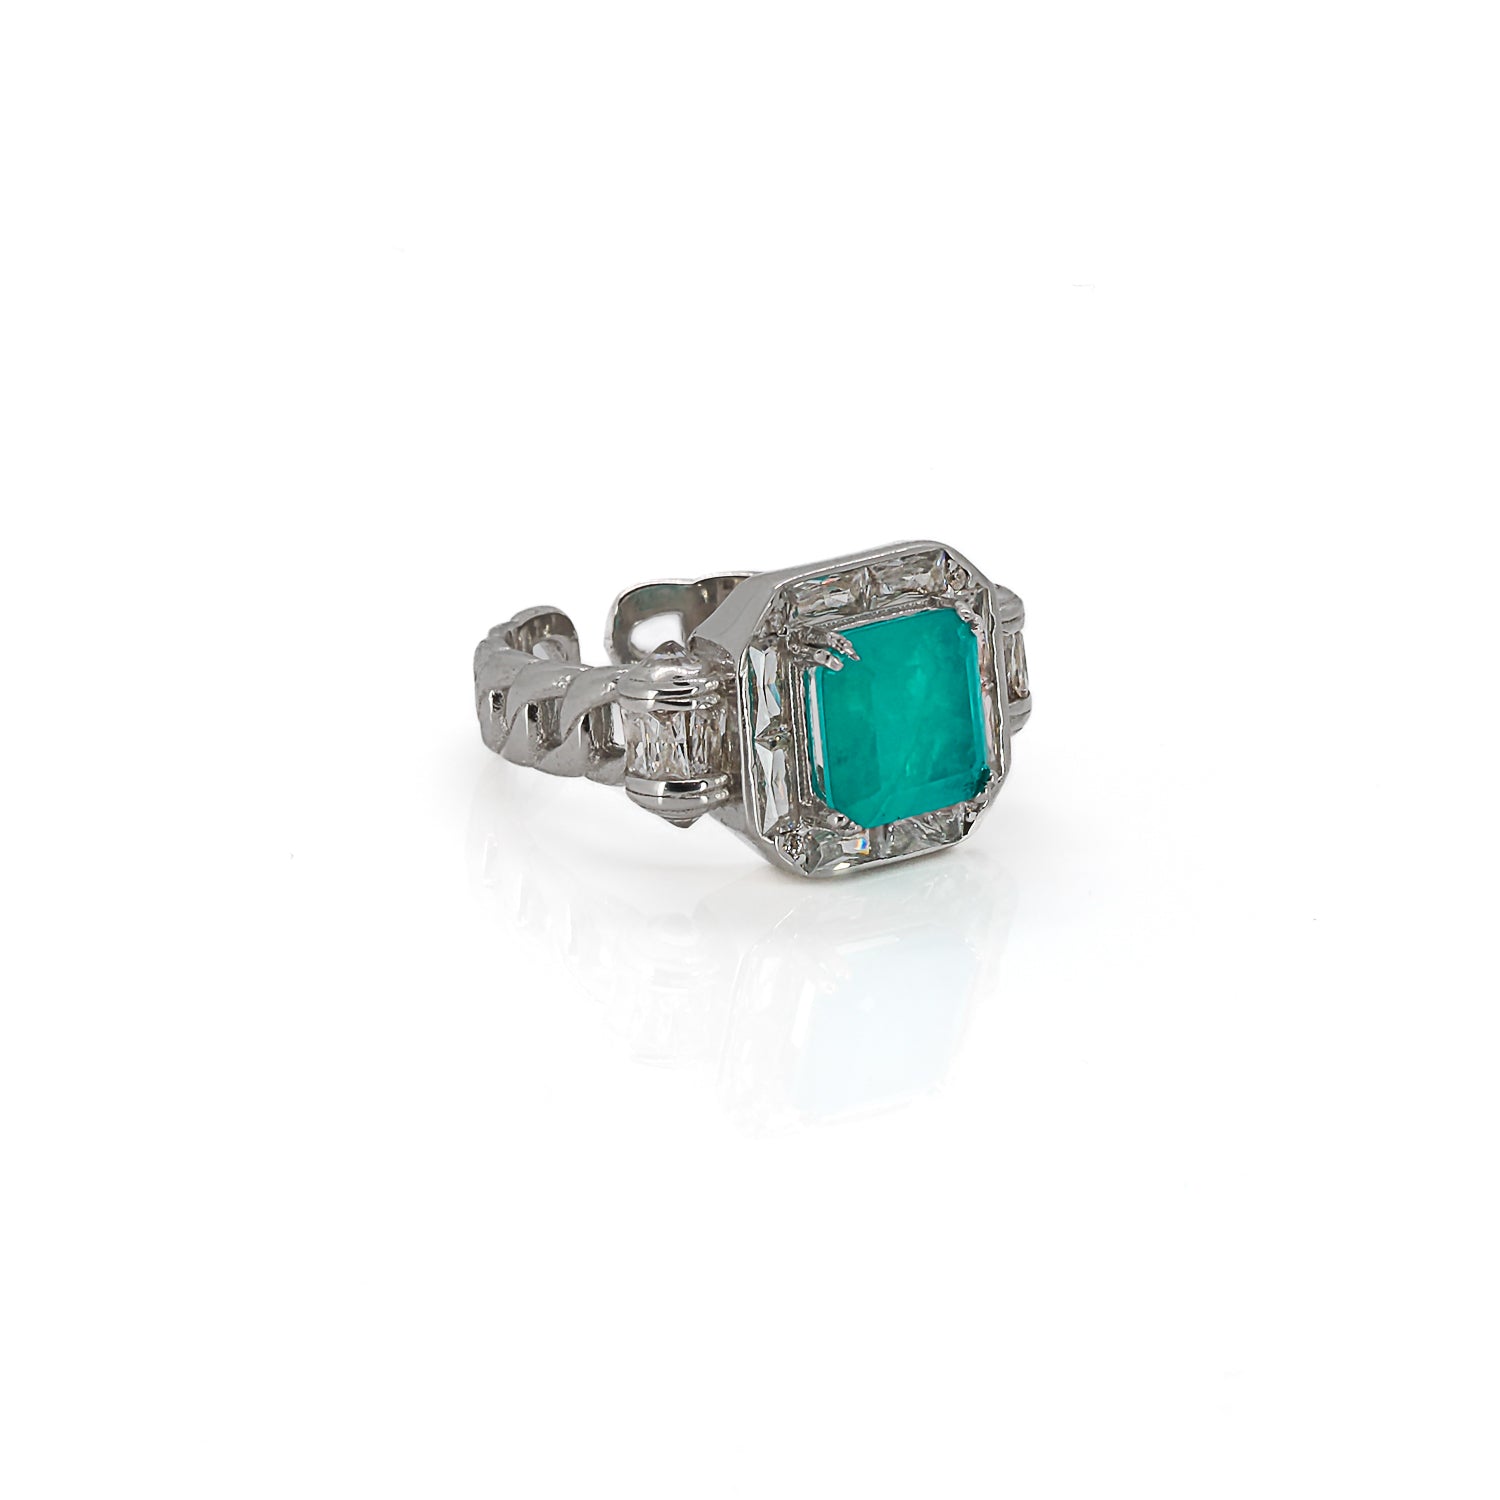 Paraiba Tourmaline Statement Ring - Artistry and Sophistication